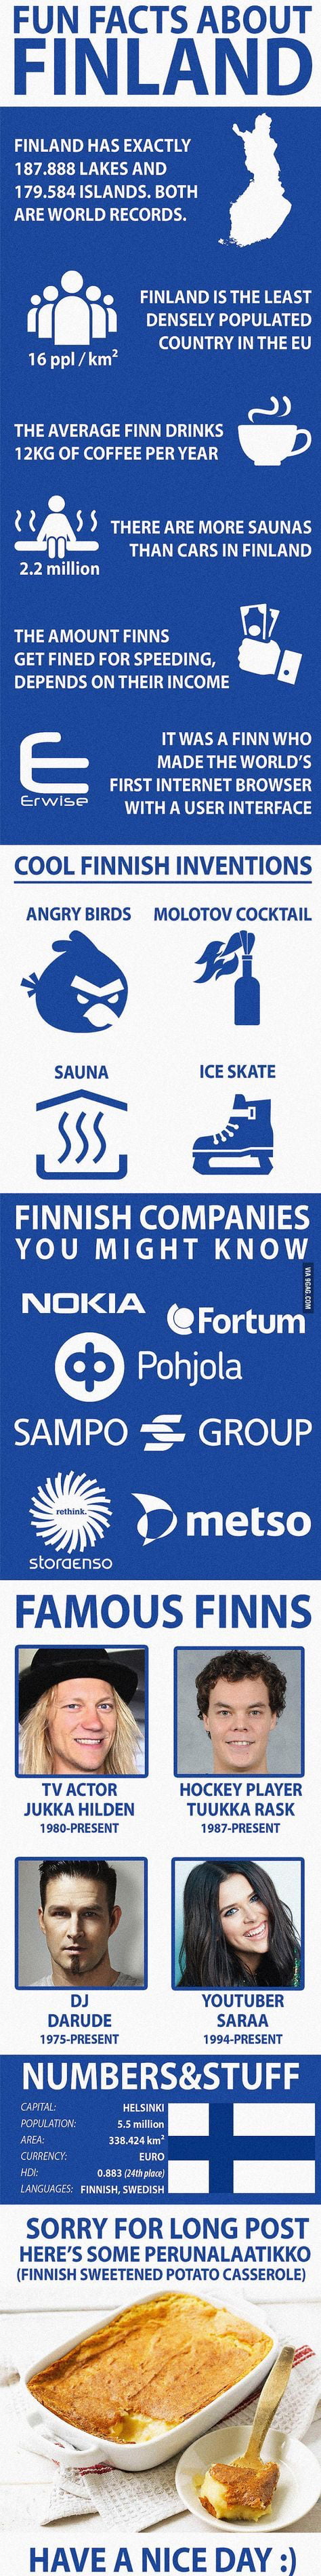 Fun facts about Finnland